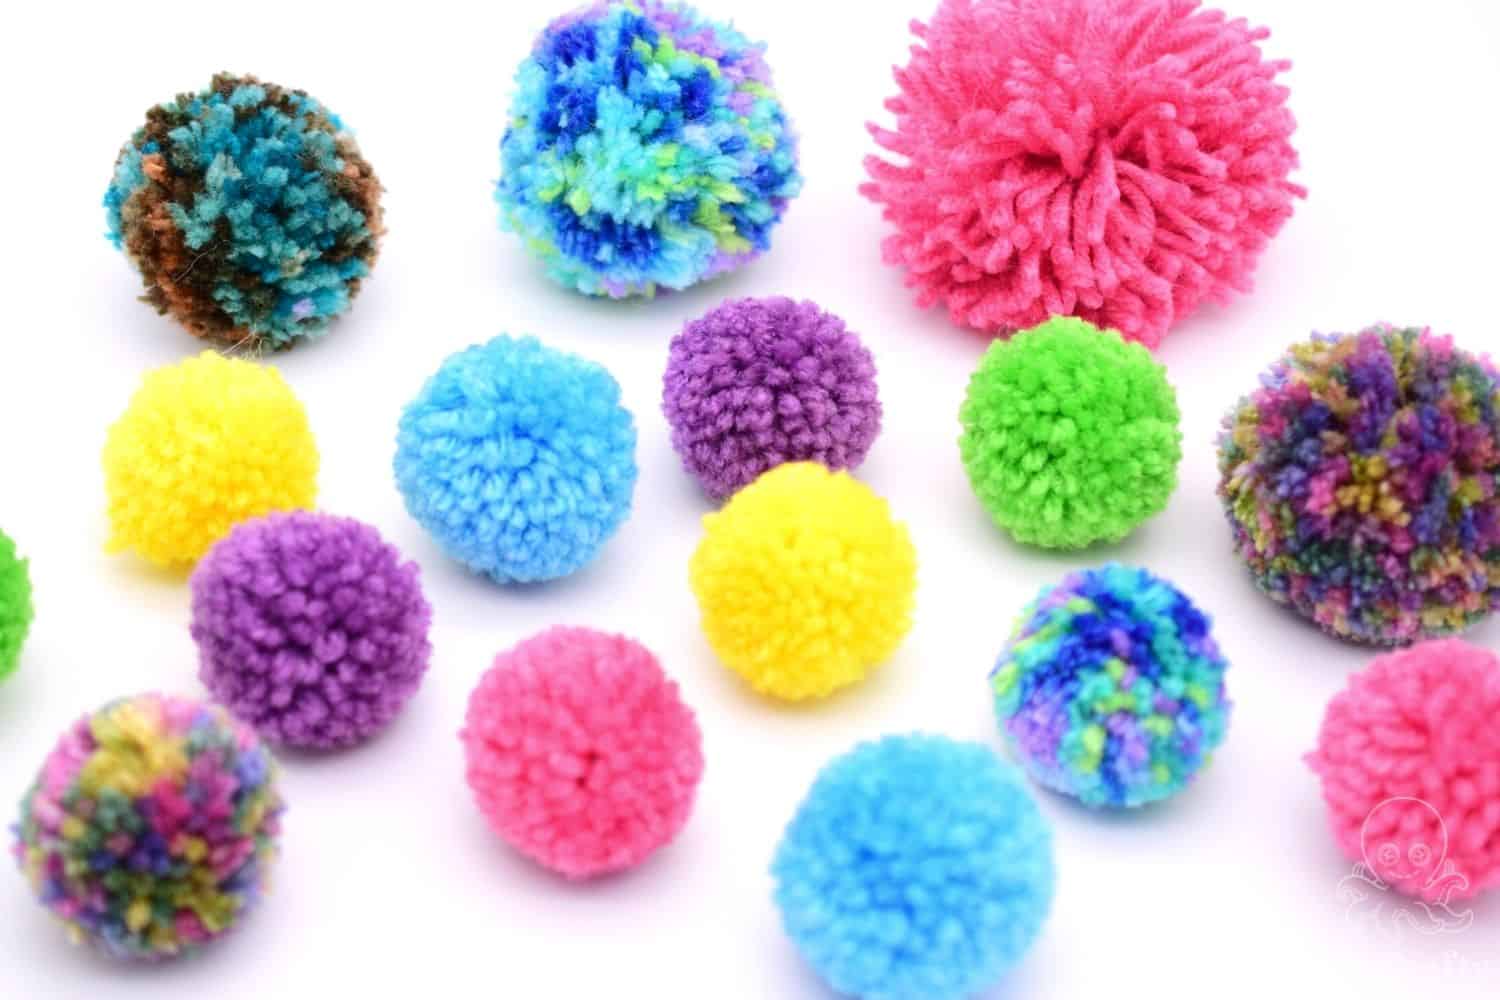 Learn how to make your own pom-poms : It's easier than you think